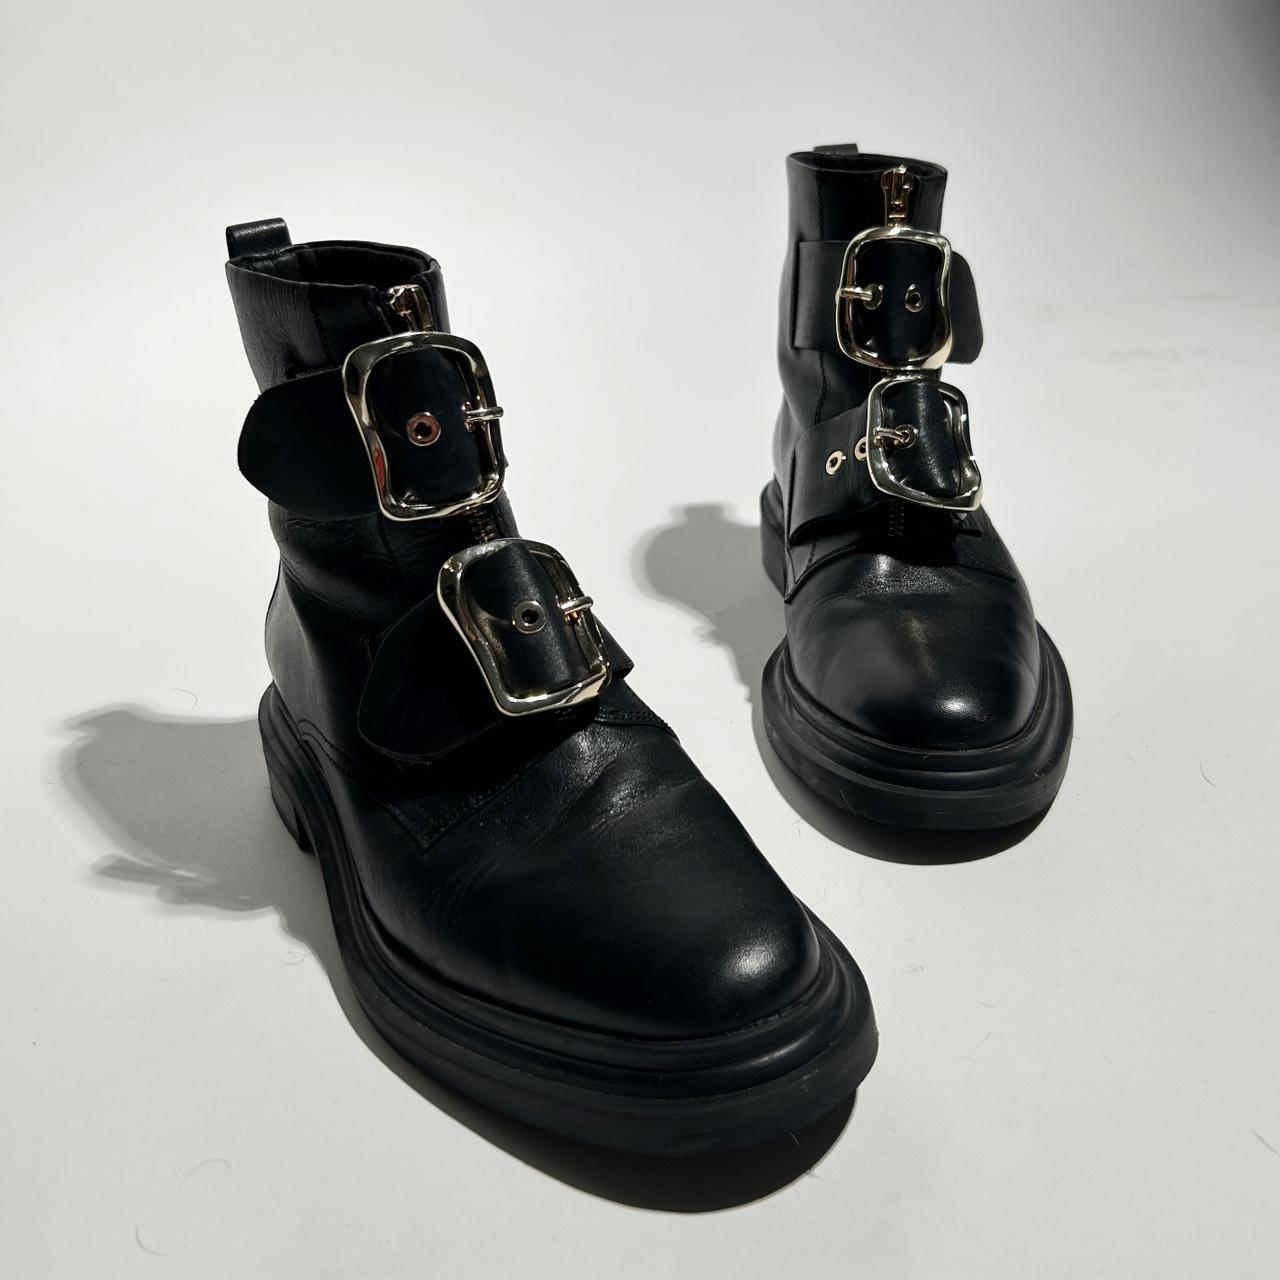 ASOS Women's Black and Gold Boots